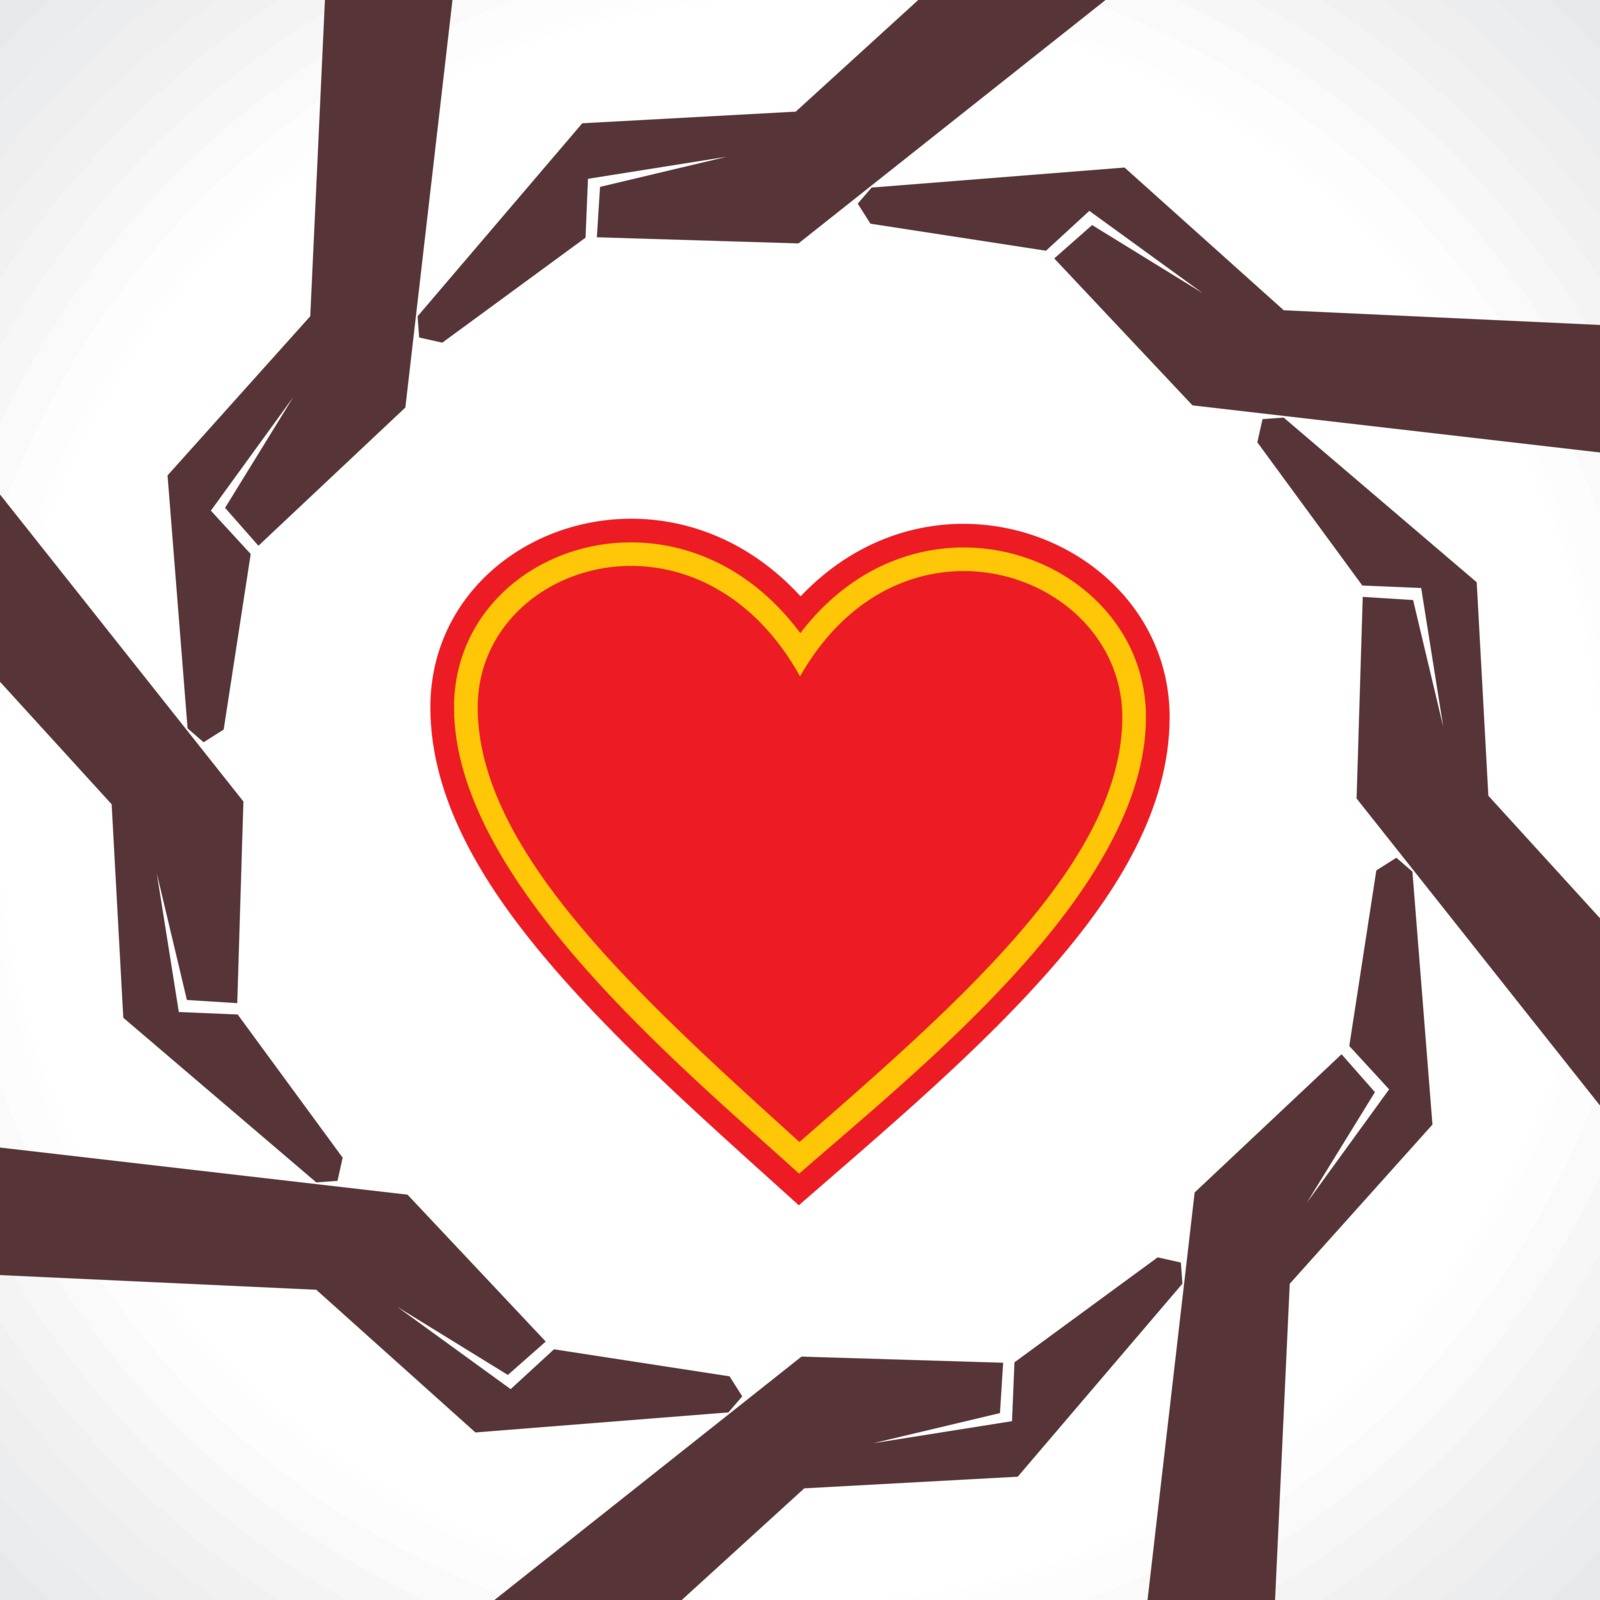 Protect human heart concept-vector illustration